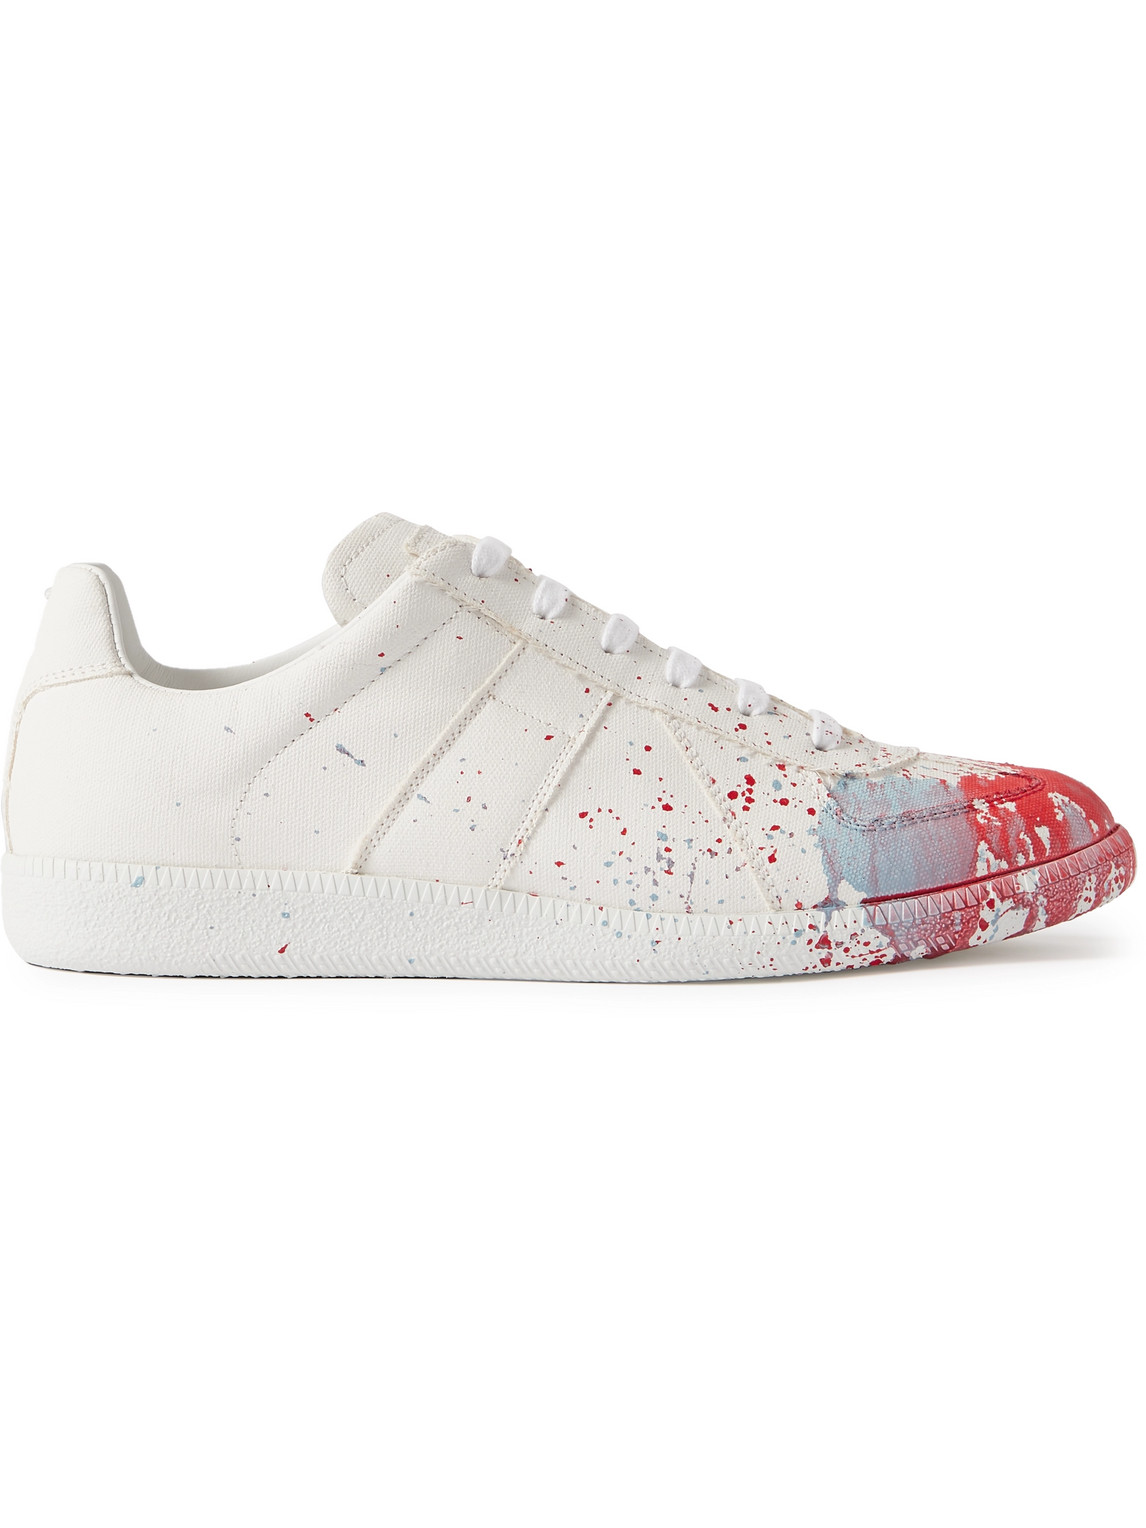 Maison Margiela Replica Painted Canvas Trainers In White